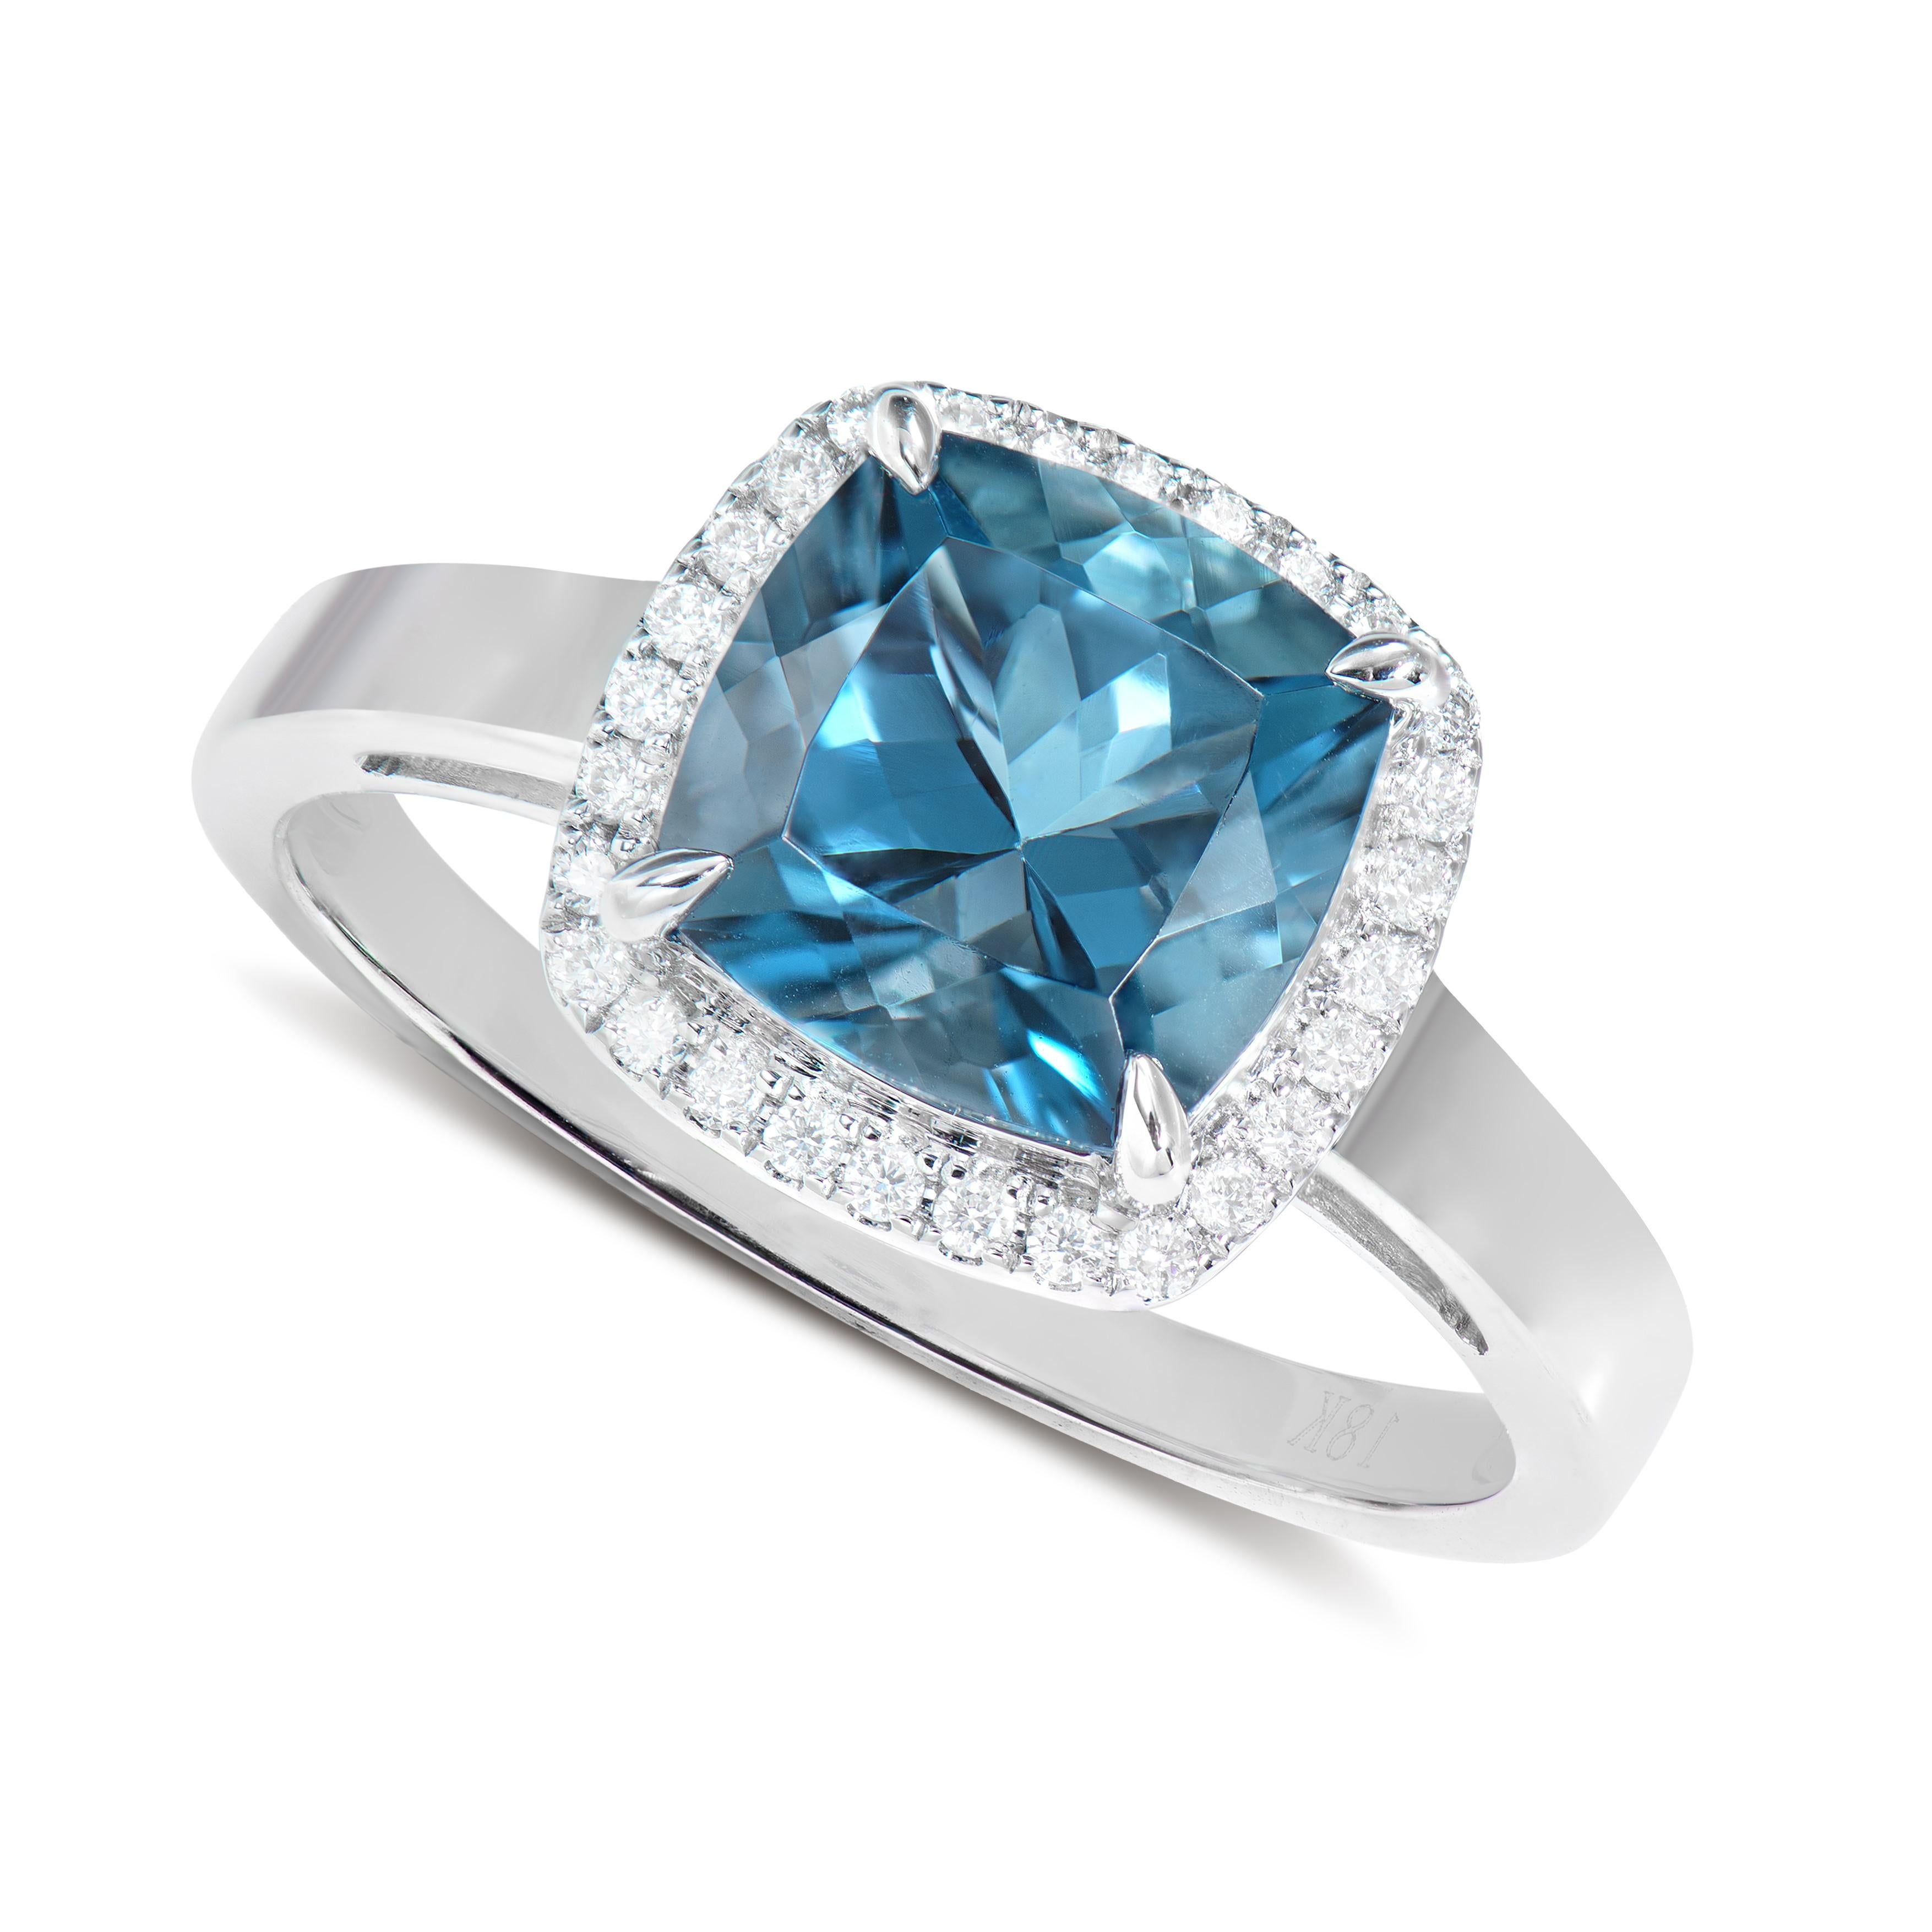 Contemporary 2.69 Carat London Blue Topaz Fancy Ring in 18Karat White Gold with White Diamond For Sale